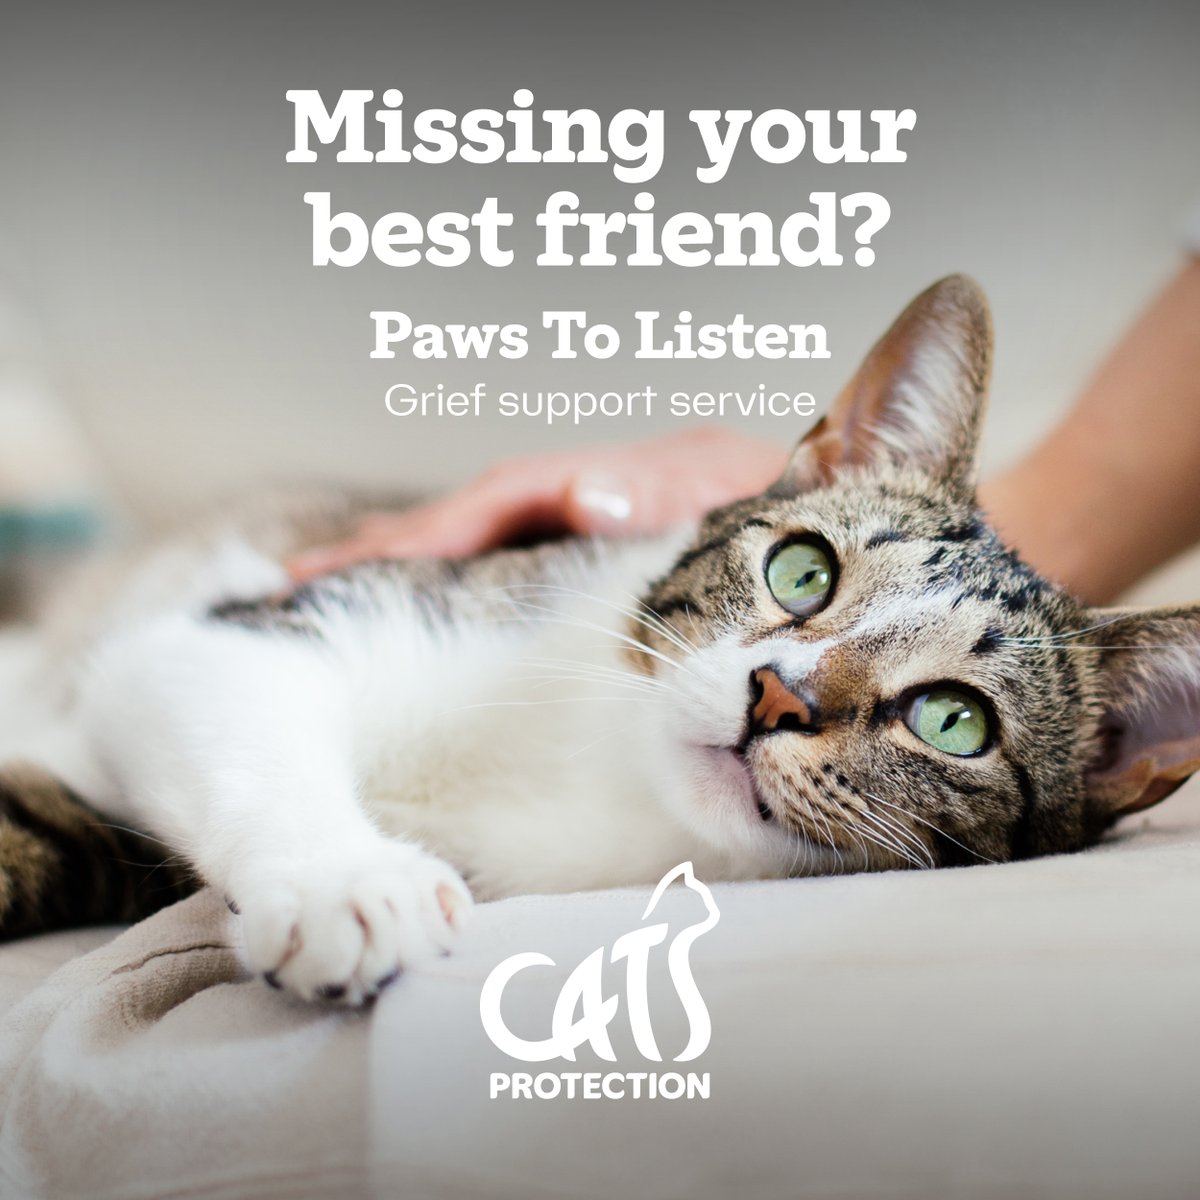 Cats Protection’s Paws to Listen grief support line is for owners grieving the death of their cat, and also if a cat has gone missing, has been reluctantly rehomed or is nearing the end of their life. Give our trained volunteers a call on 0800 024 94 94, Monday-Friday 9am-5pm.